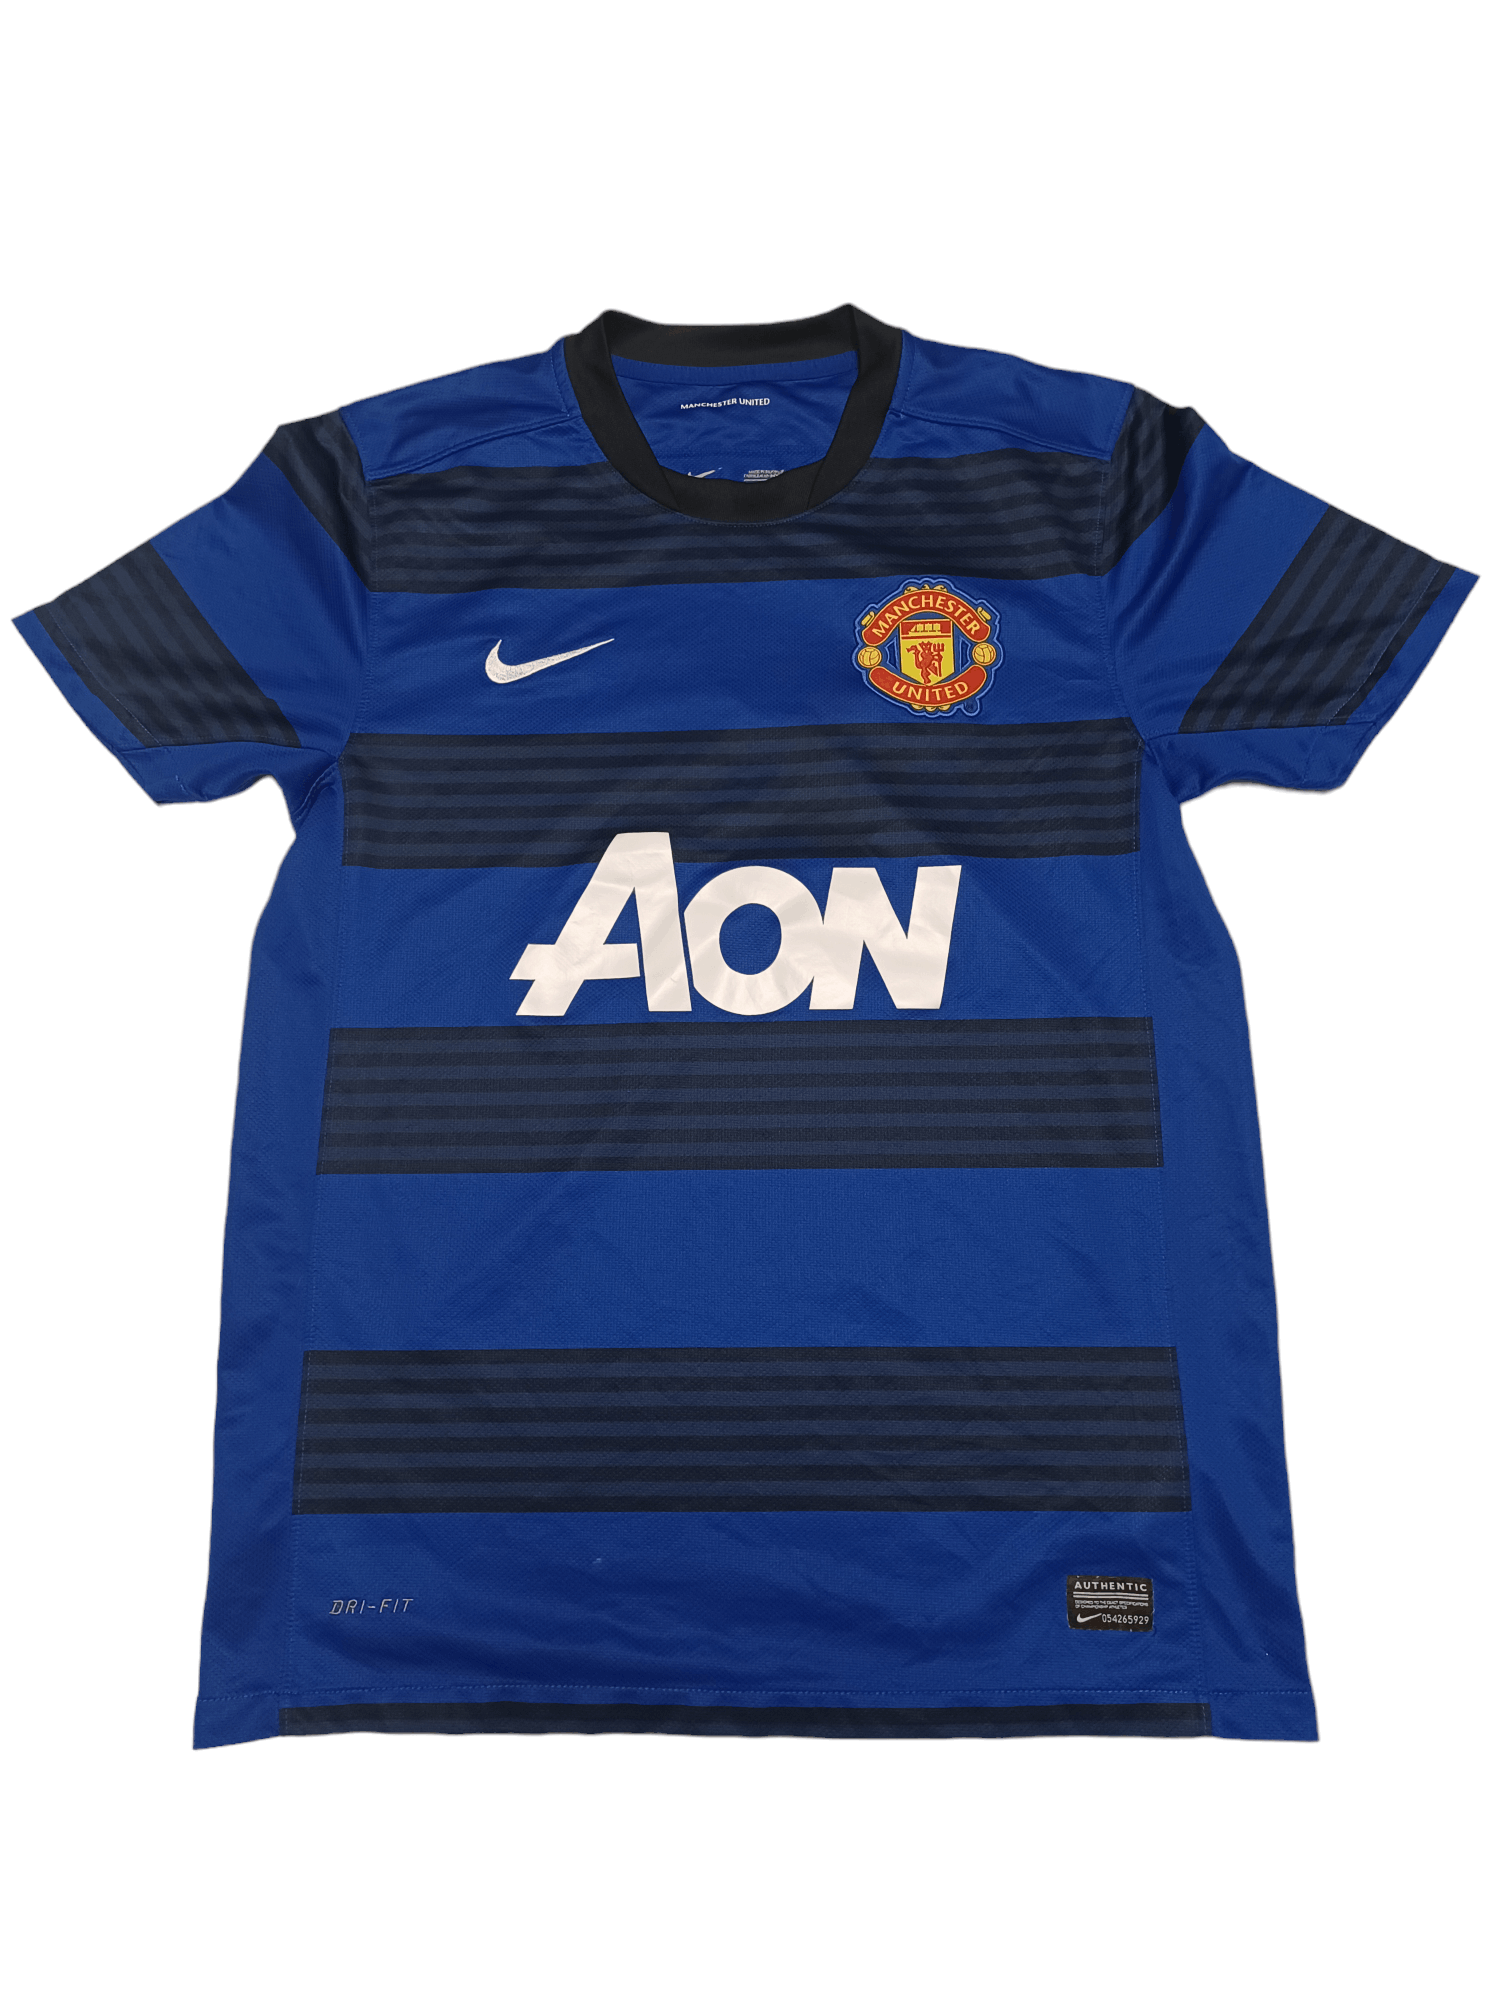 Pre-owned Manchester United X Soccer Jersey Nike 2011-2012 Man United Away Jersey Soccer Football In Striped